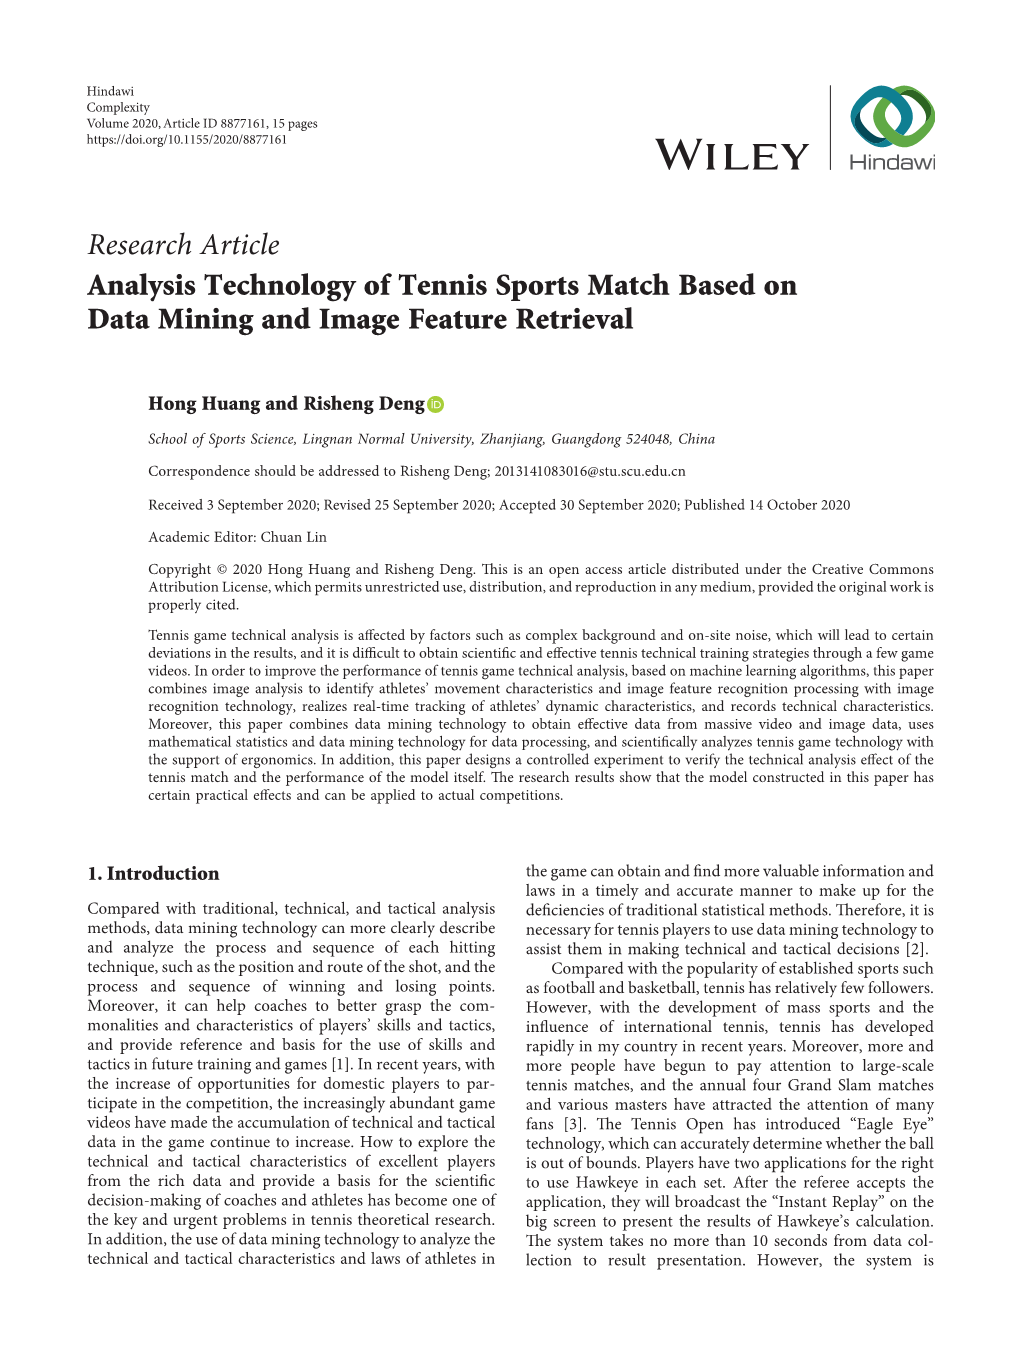 Analysis Technology of Tennis Sports Match Based on Data Mining and Image Feature Retrieval